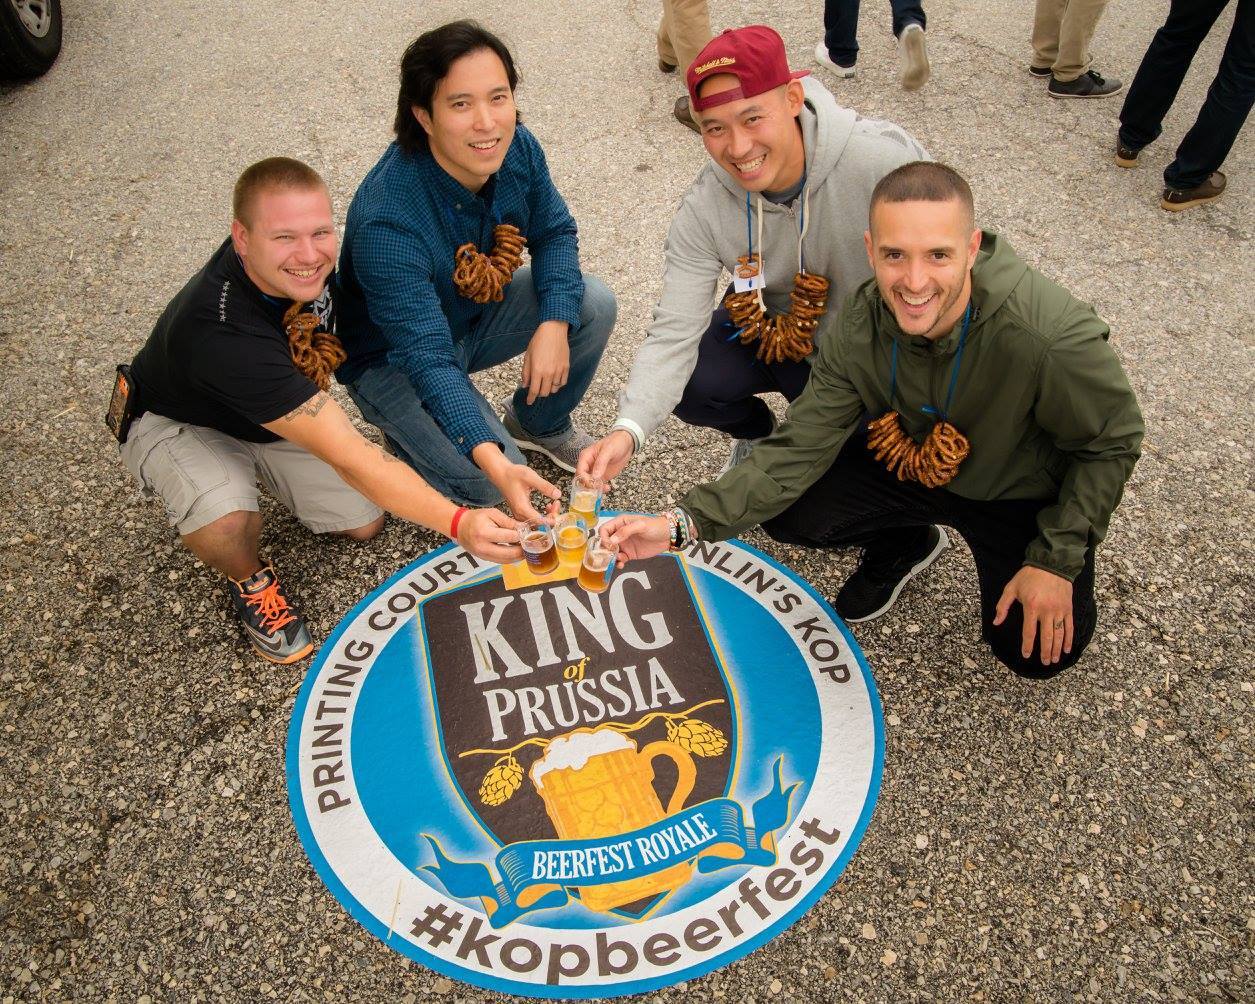 four people croucine around a circular decal on pavement, holding small beer mugs in the center